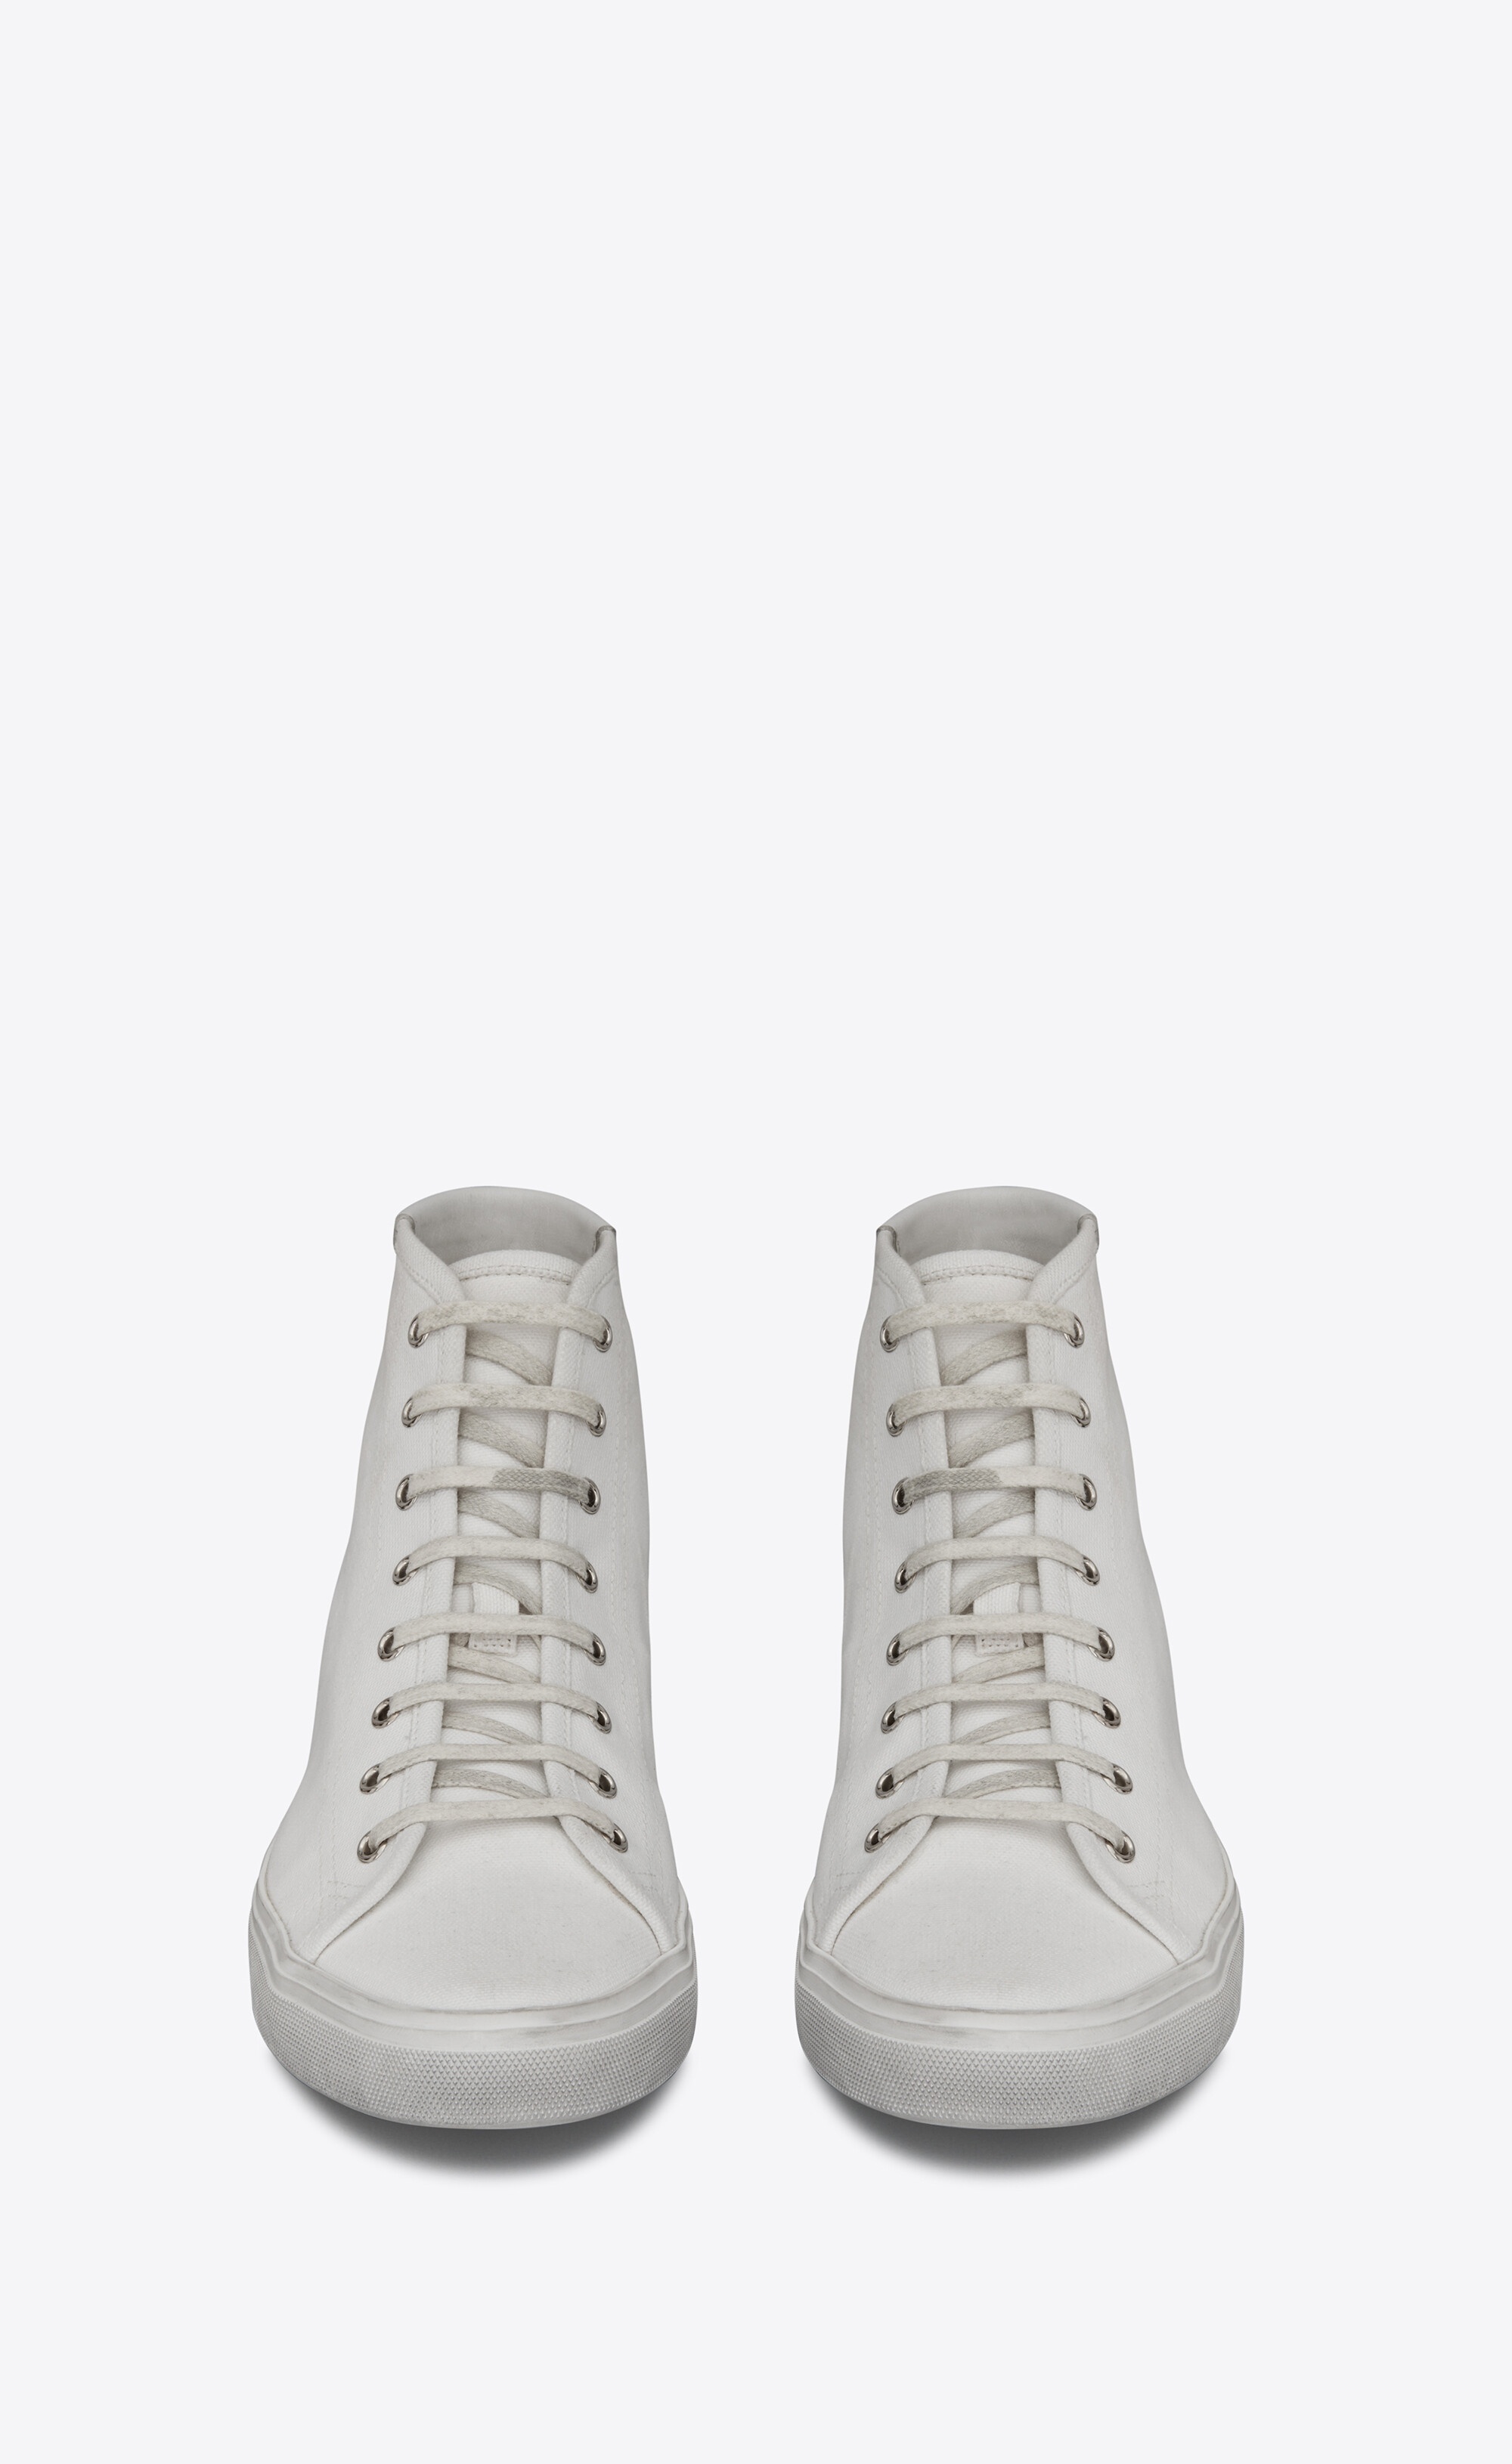 malibu mid-top sneakers in canvas and leather - 2